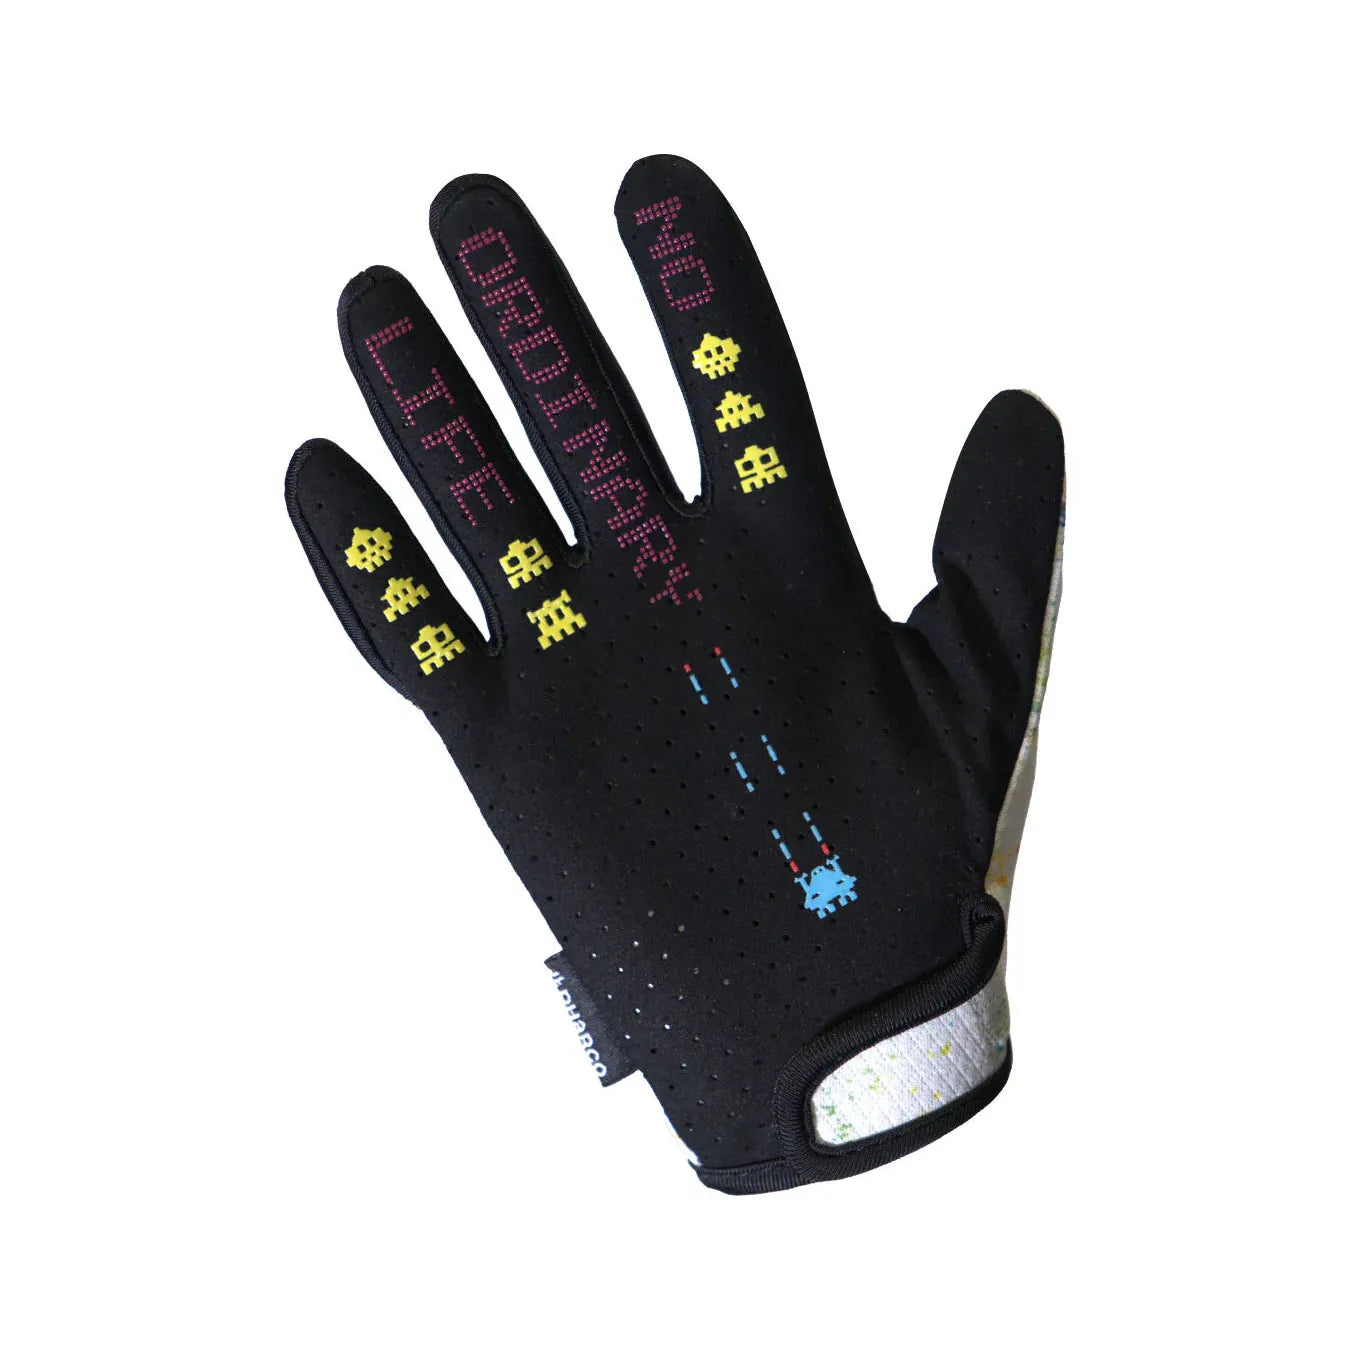 DHaRCO Youth Race Gloves - Youth L - Paint Splat